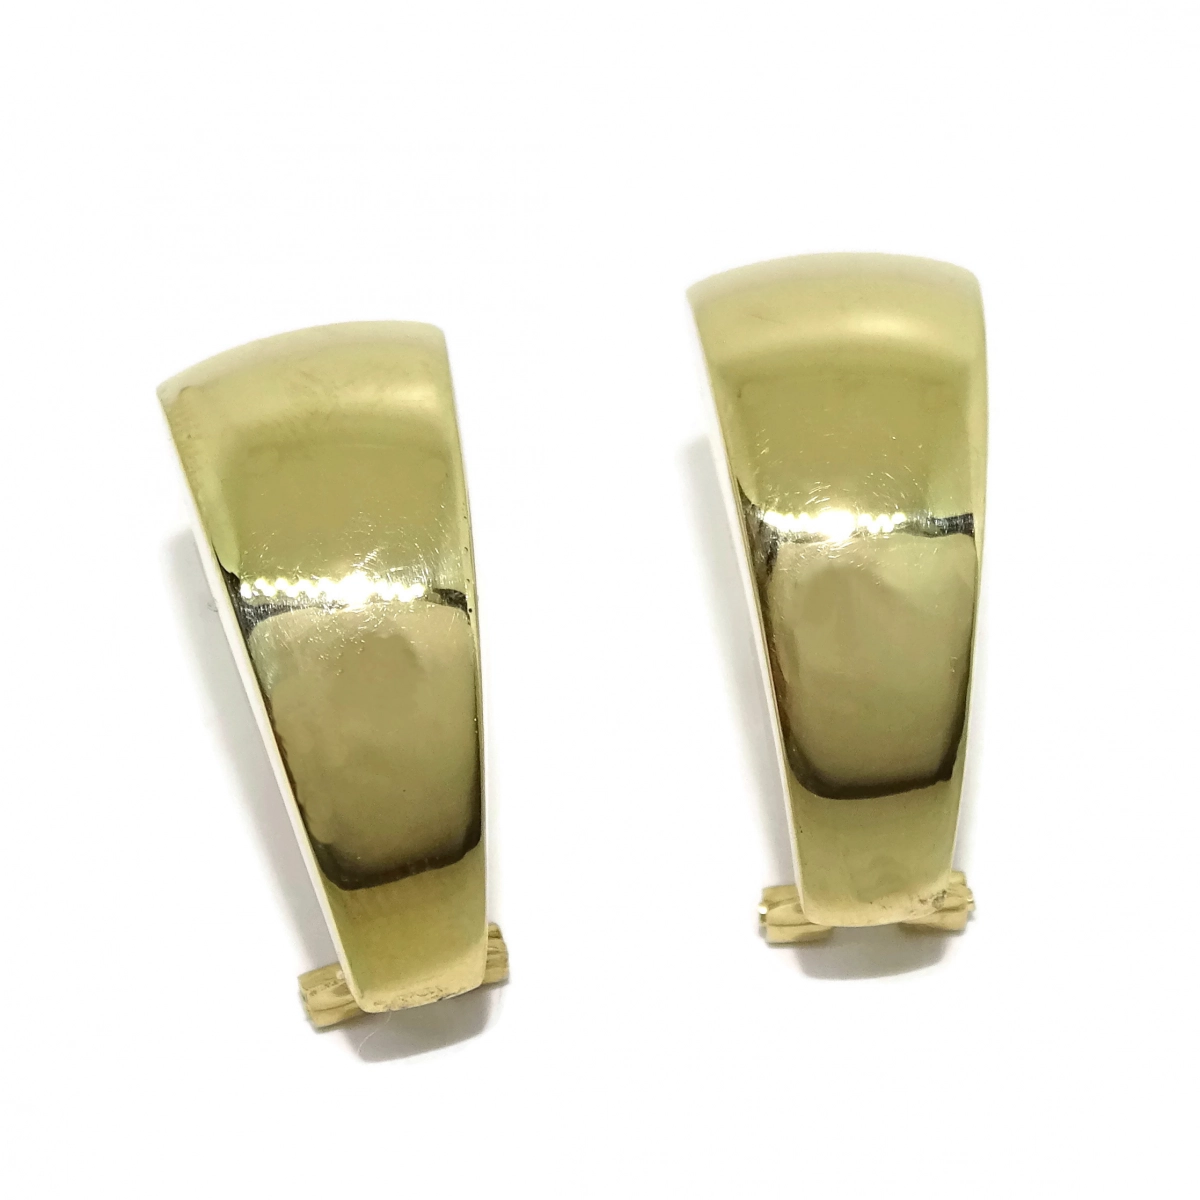 EARRINGS OF 18K YELLOW GOLD SMOOTH GLITTER WITH CLOSE OMEGA. 2.40 CM HIGH BY 1.00 NEVER SAY NEVER